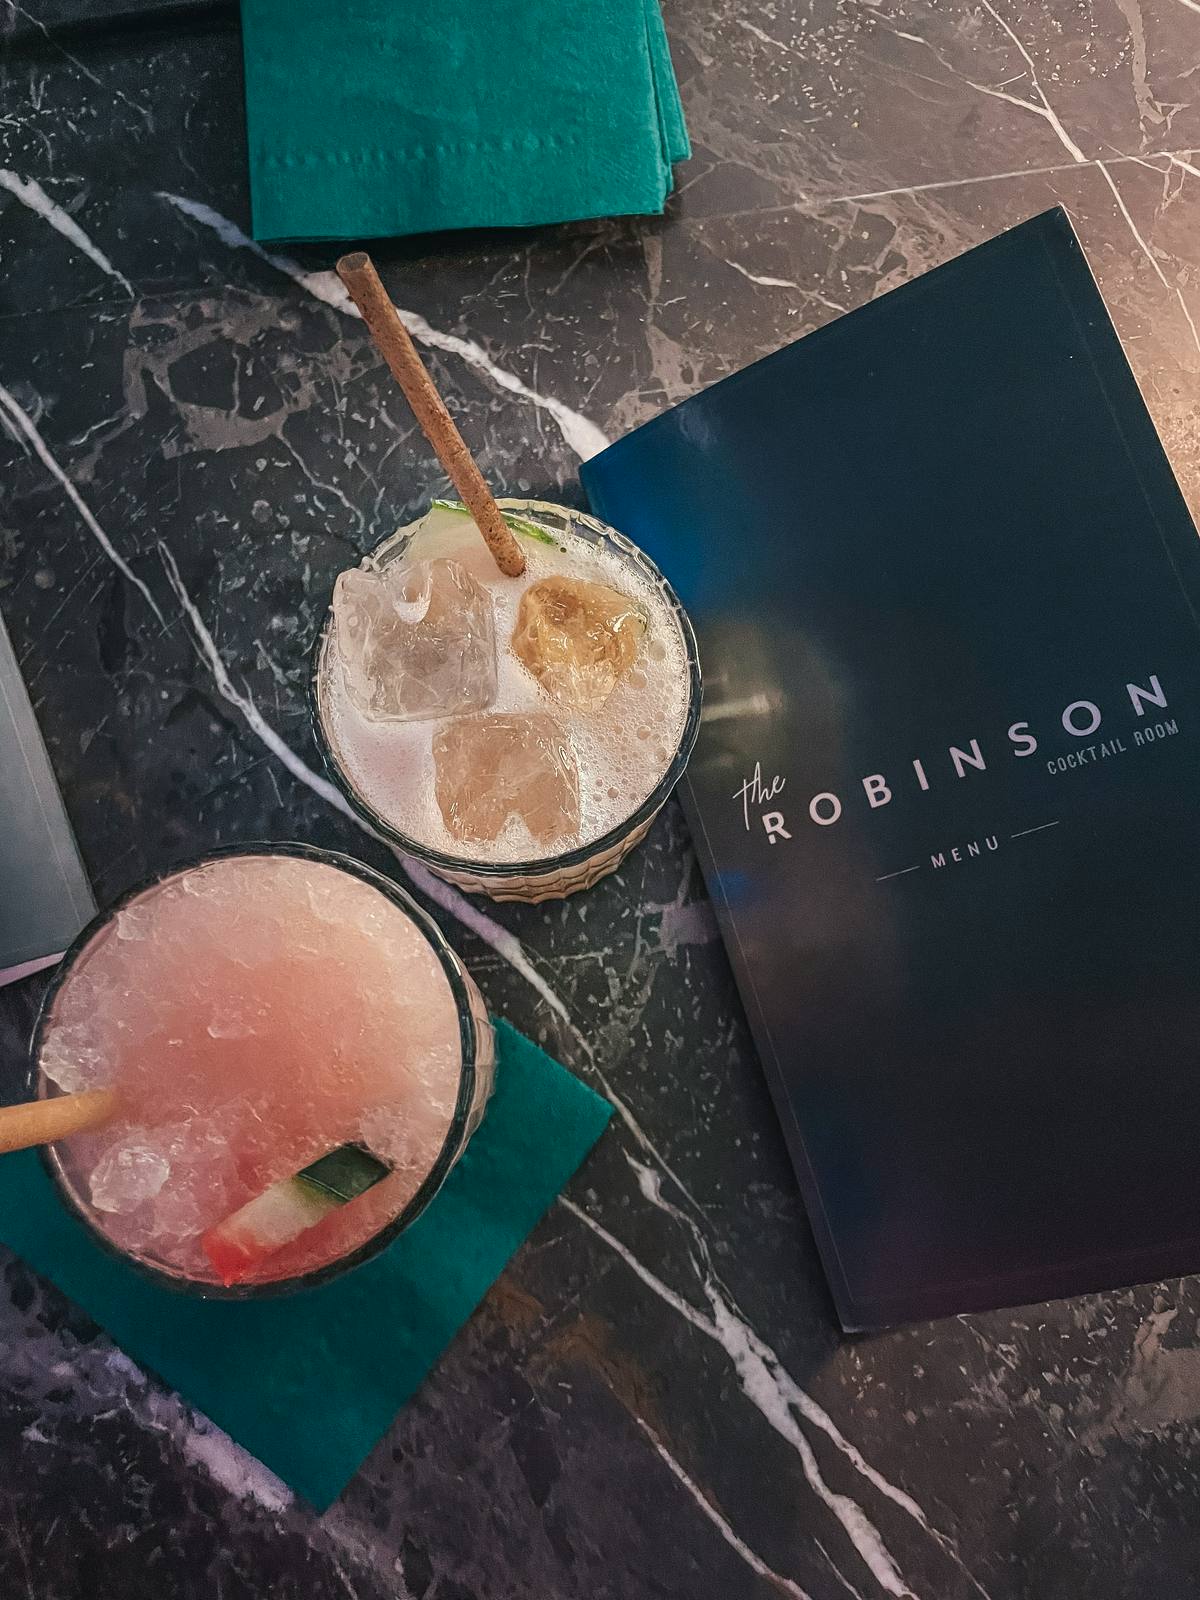 The Robinson cocktail room in Orlando